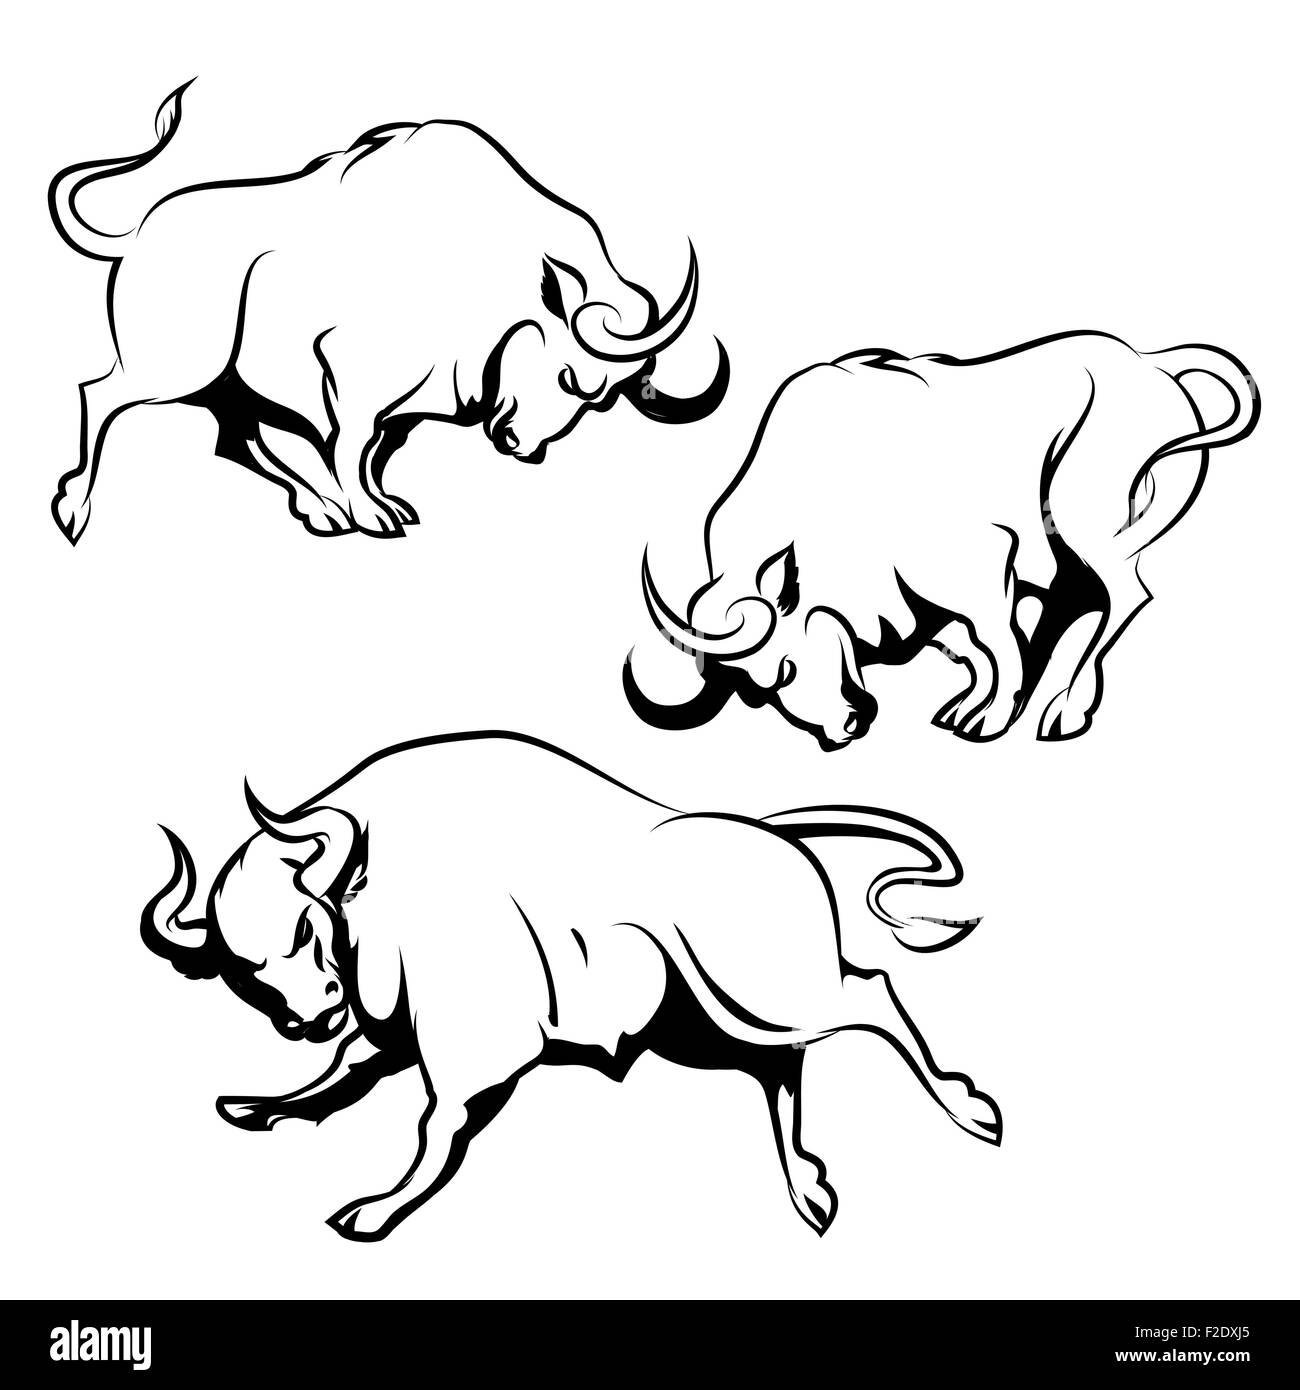 Bull Sign or Emblem set. Running Angry Bull in different poses. Isolated on white background. Stock Vector